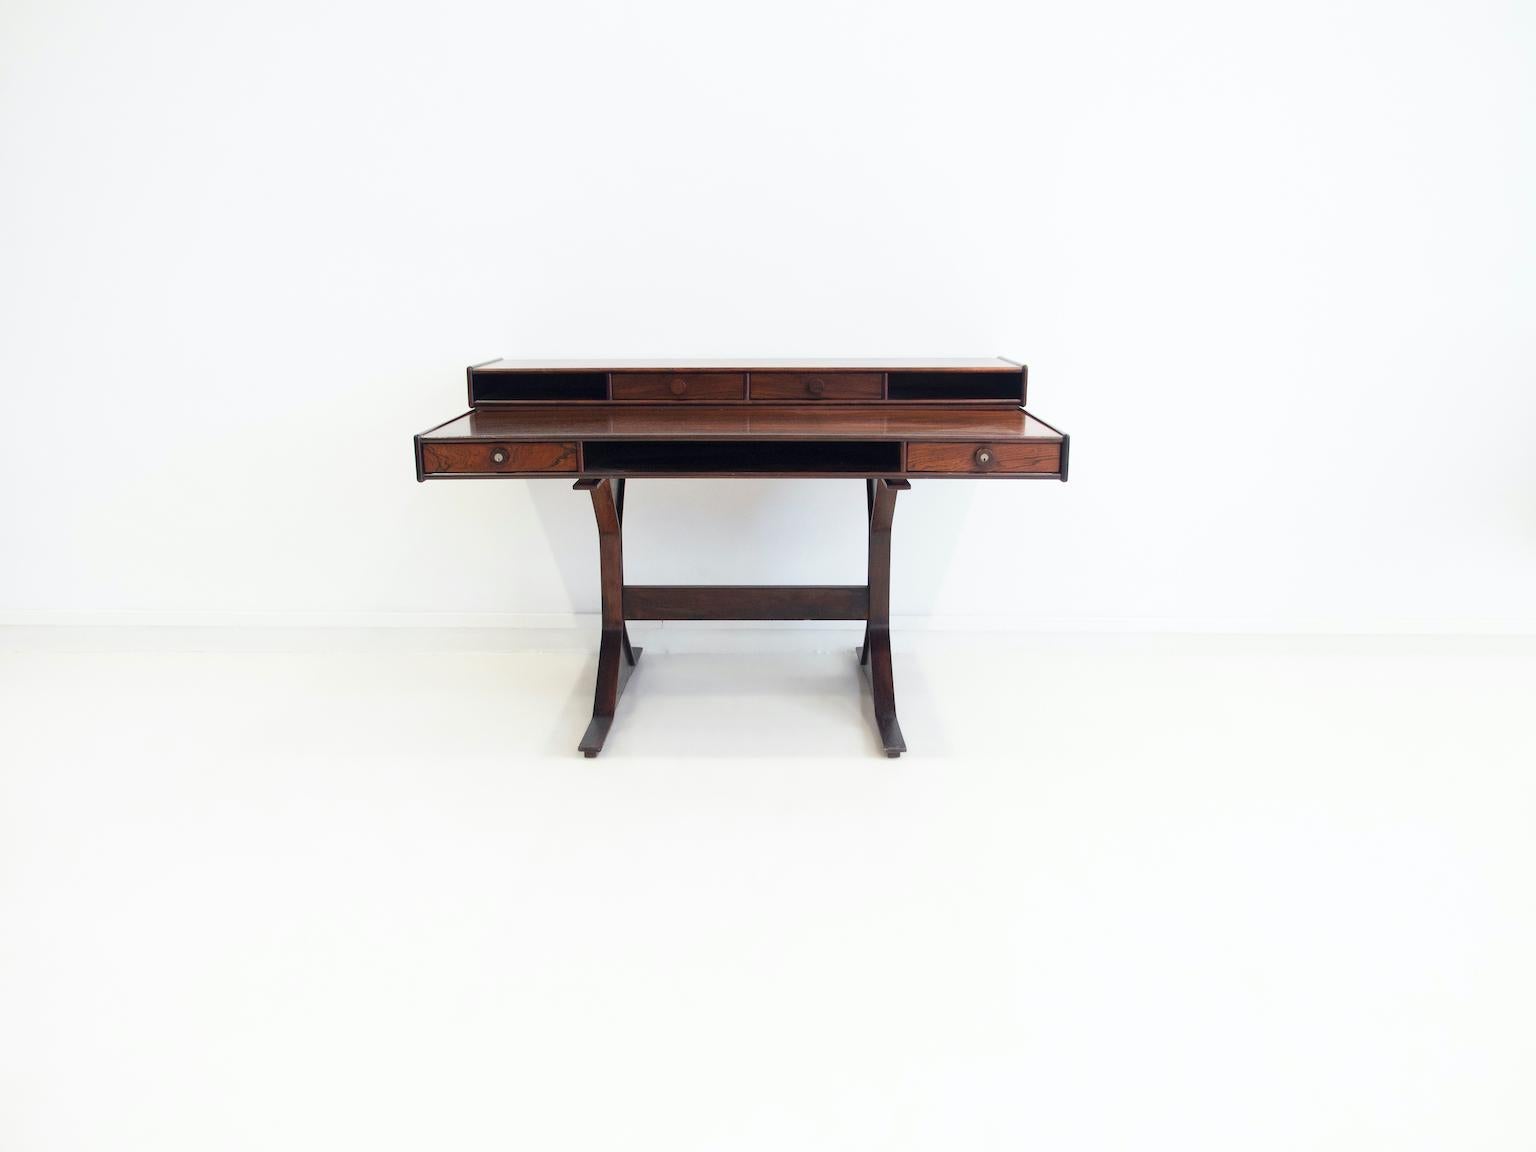 Hardwood writing desk designed by Gianfranco Frattini and produced by Bernini, Italy. The desk features a removable top part with extra drawers and storage compartments. This desk can be placed against the wall or in the middle of the room as its